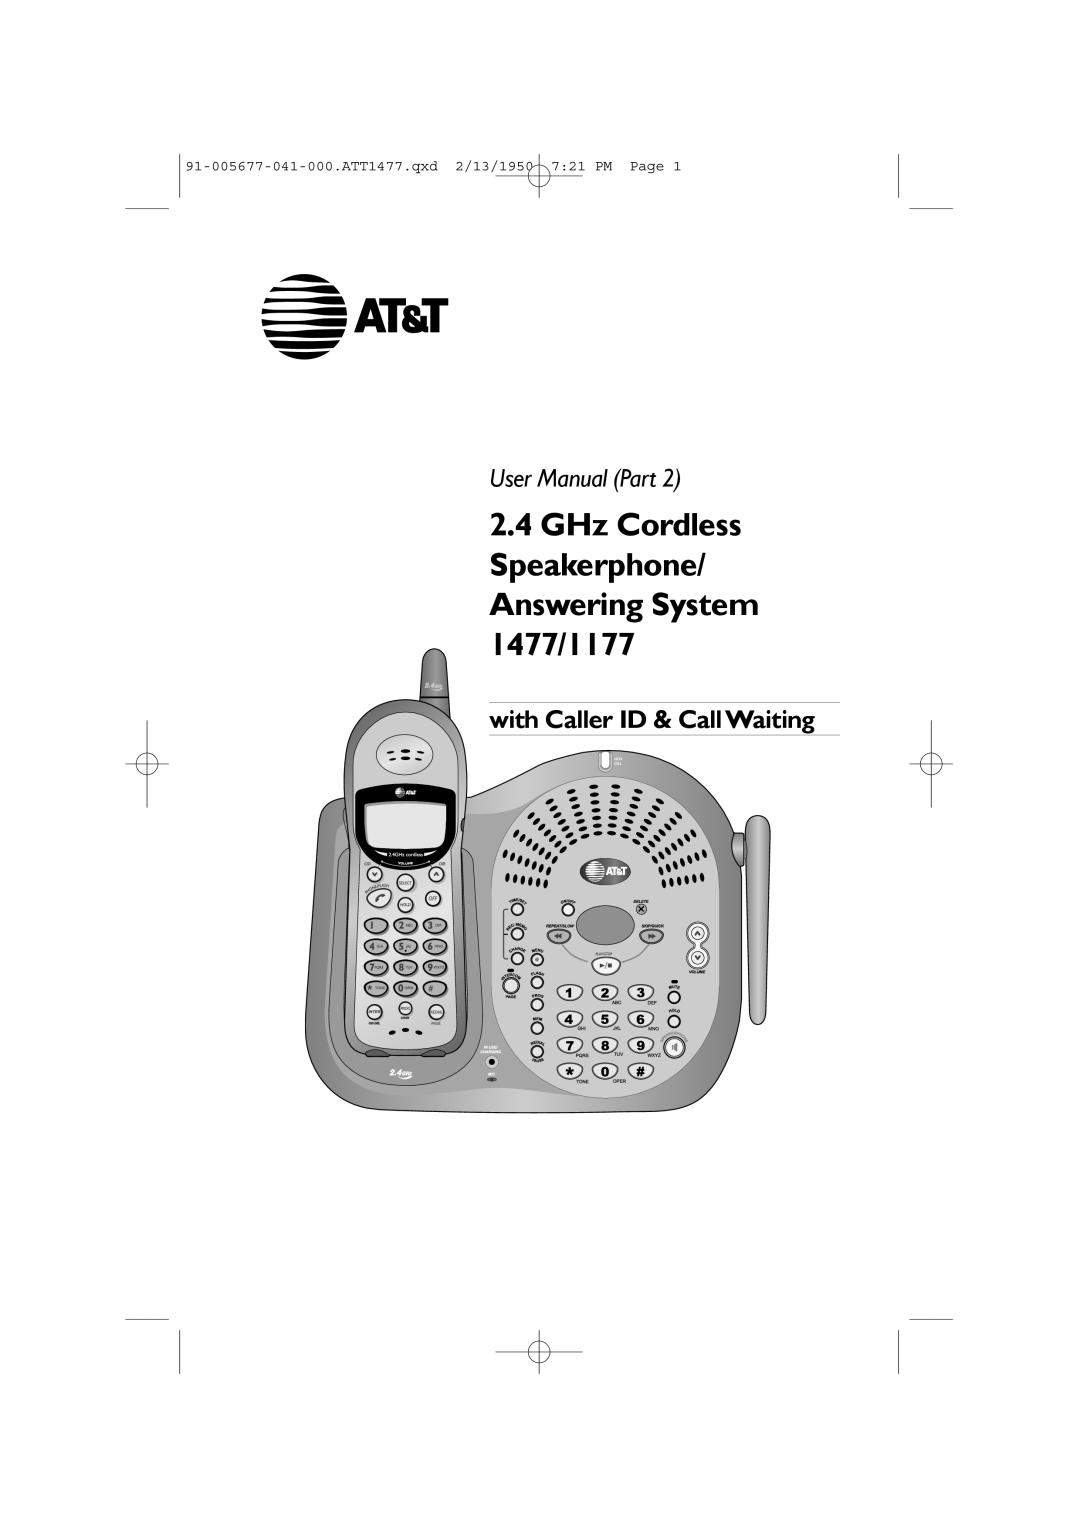 AT&T 1177 user manual User Manual Part, with Caller ID & CallWaiting, 91-005677-041-000.ATT1477.qxd 2/13/1950 721 PM Page 